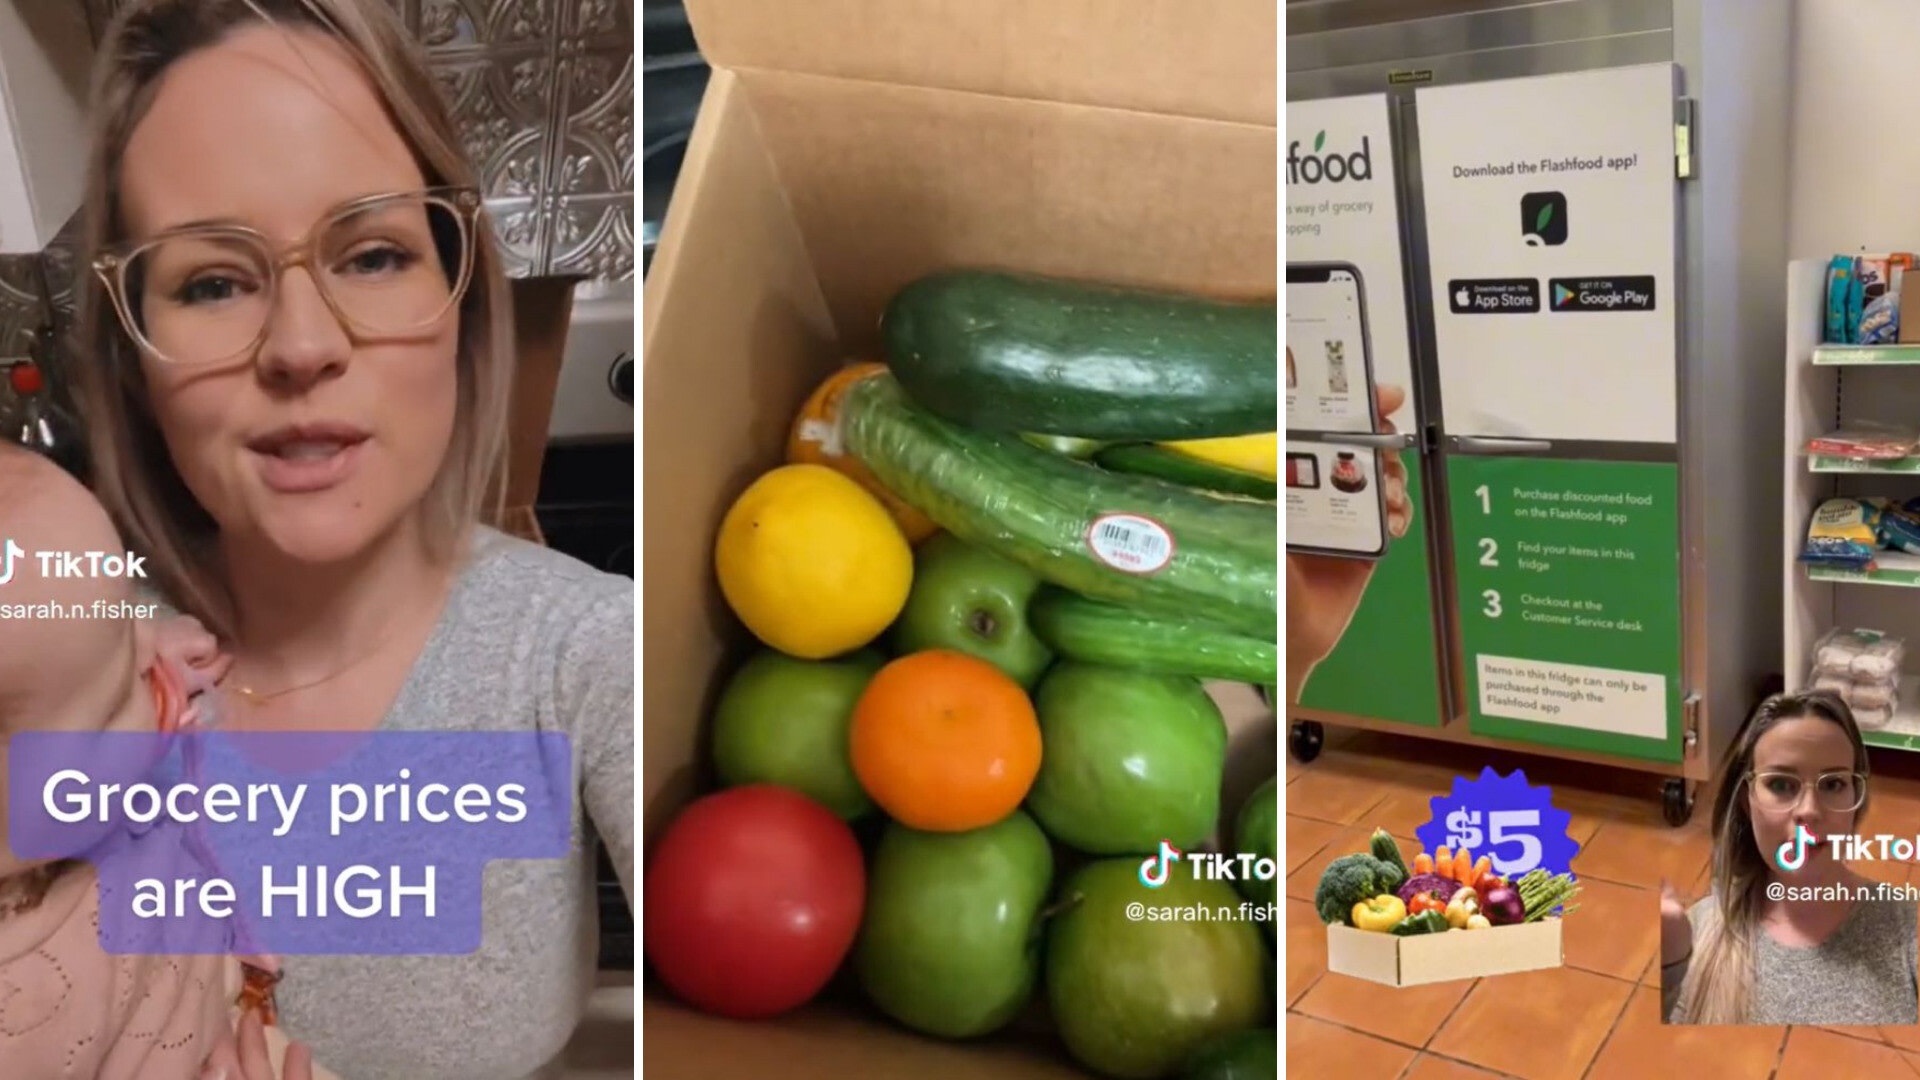 TikToker shares how Flashfood saves her real money on produce